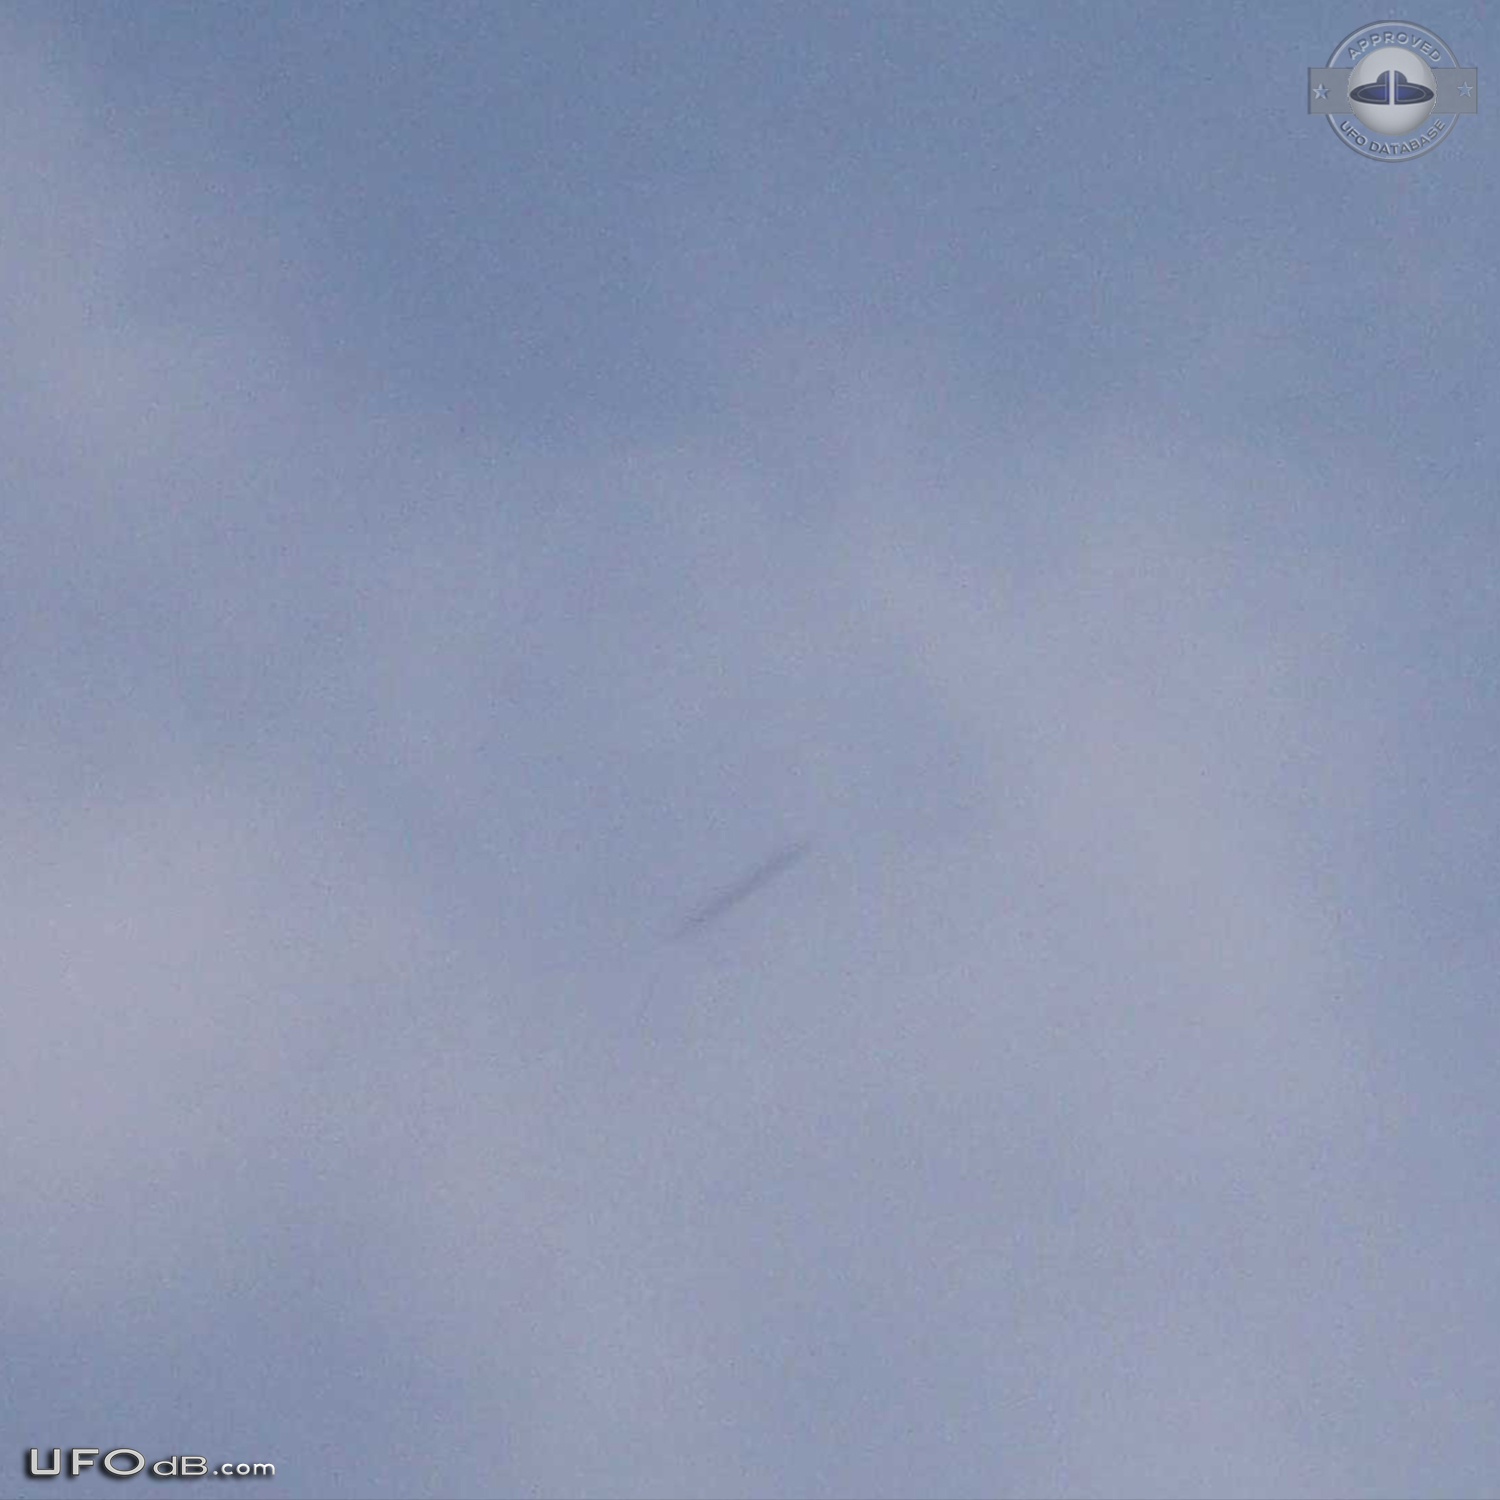 Many UFO sightings in Lebanon vilage got citizens to open their minds  UFO Picture #438-4